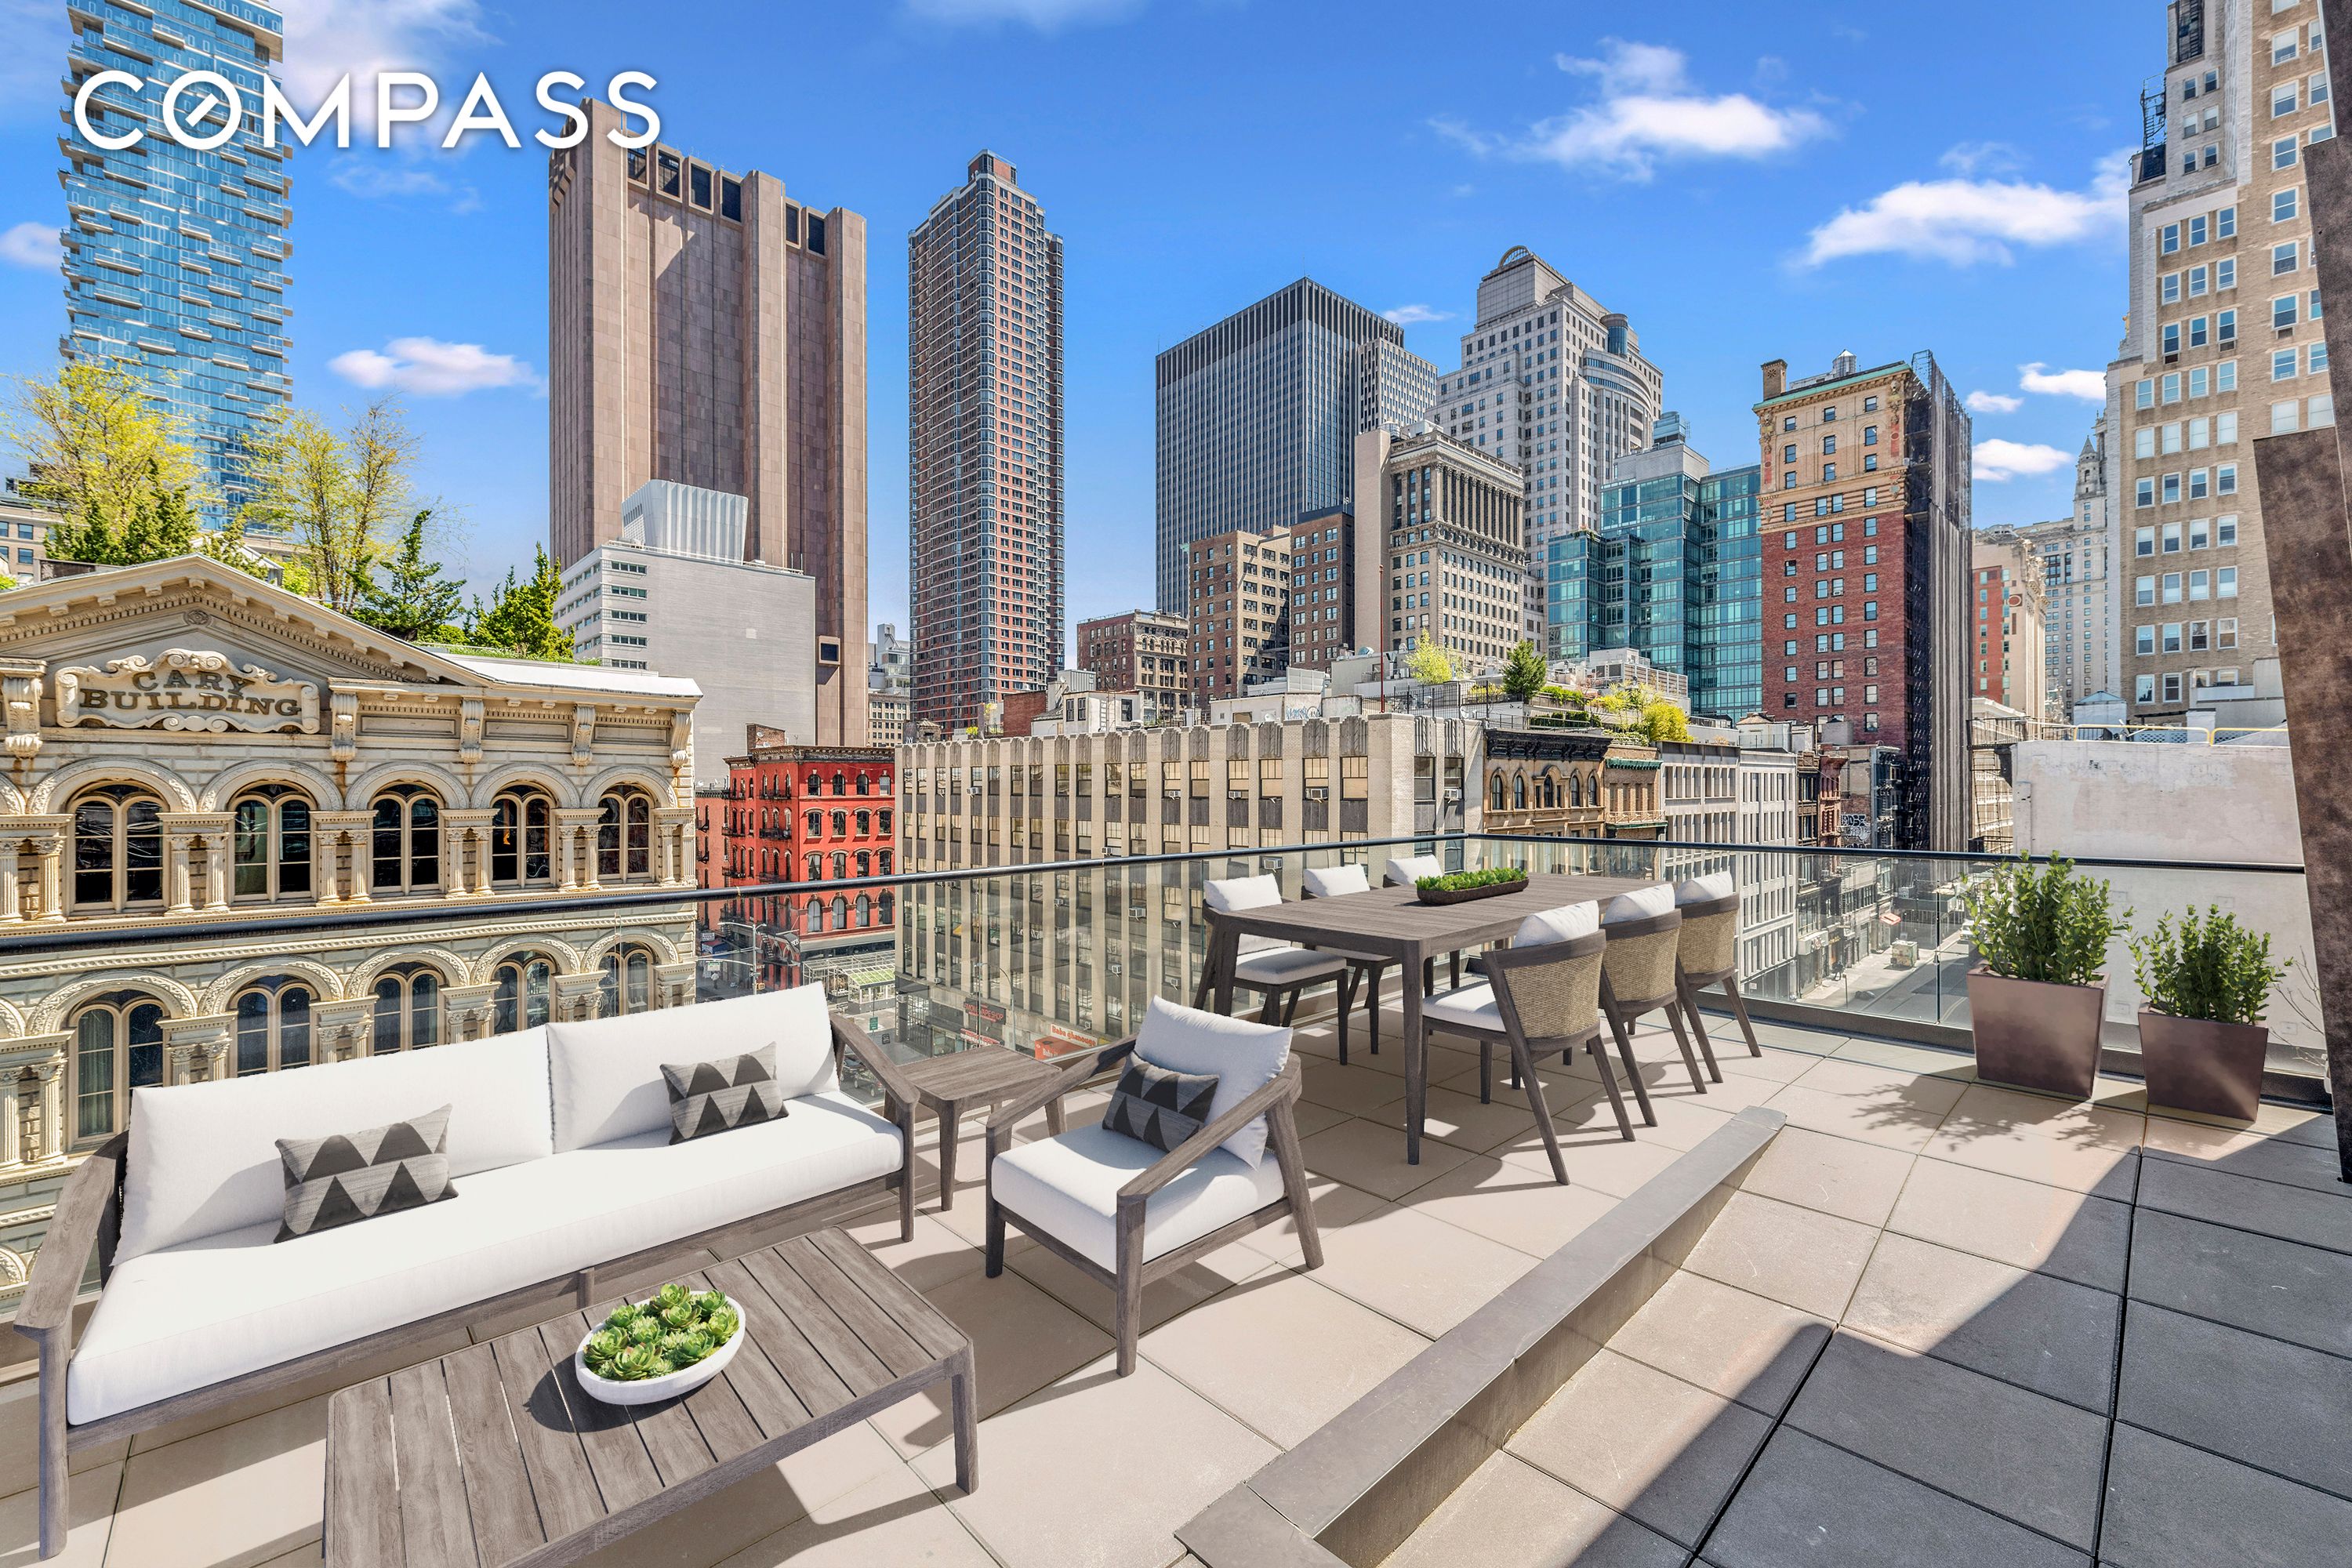 146 Church Street 7, Tribeca, Downtown, NYC - 2 Bedrooms  
2 Bathrooms  
5 Rooms - 